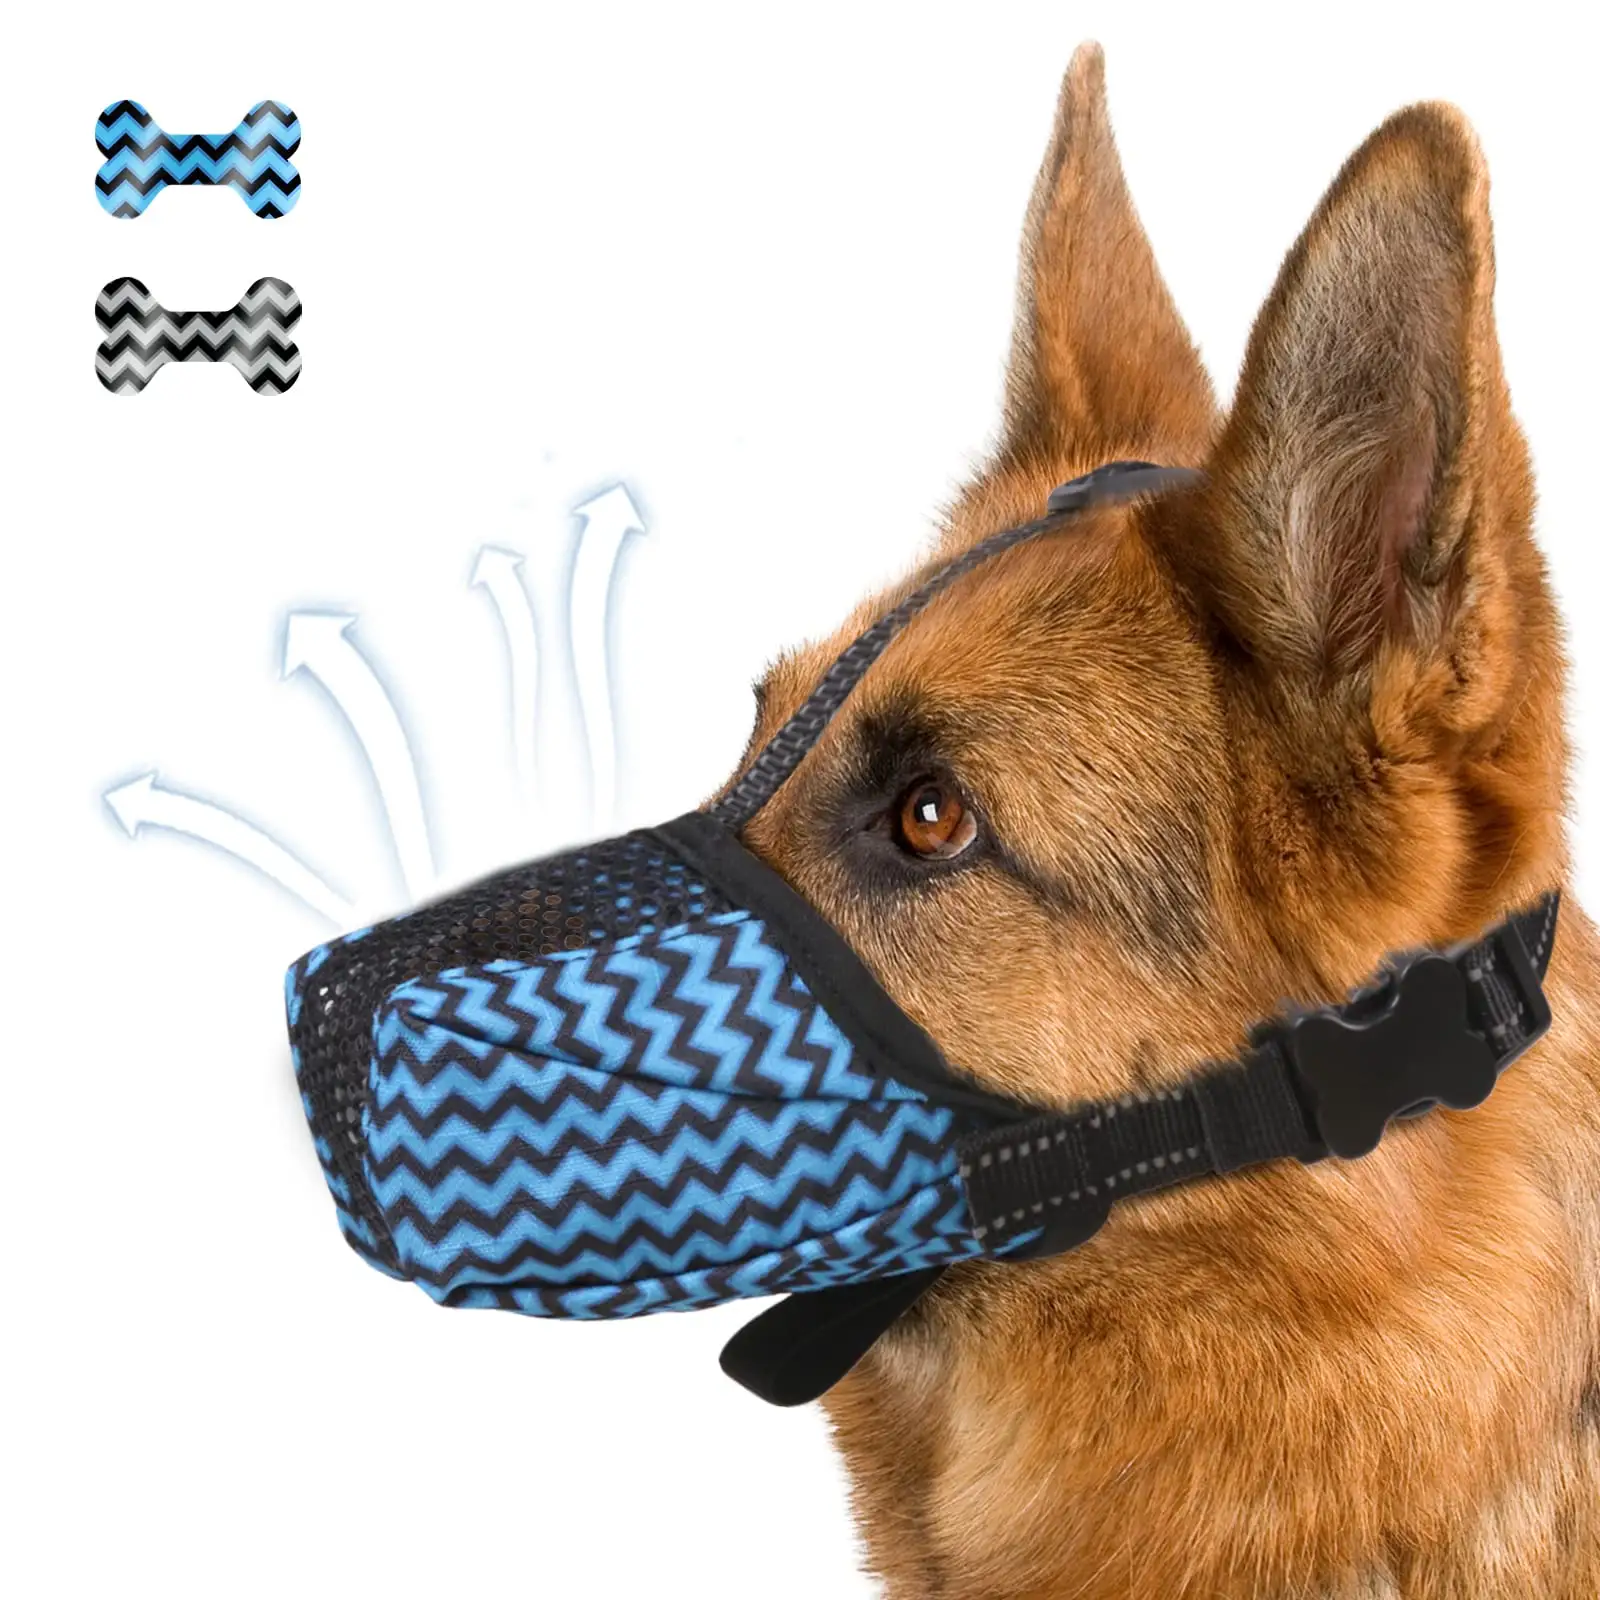 Anti & Prevent Soft Basket Muzzle Biting Barking Chewing Dog Muzzle Air Mesh Breathable Muzzle with Reflective Adjustable Strap